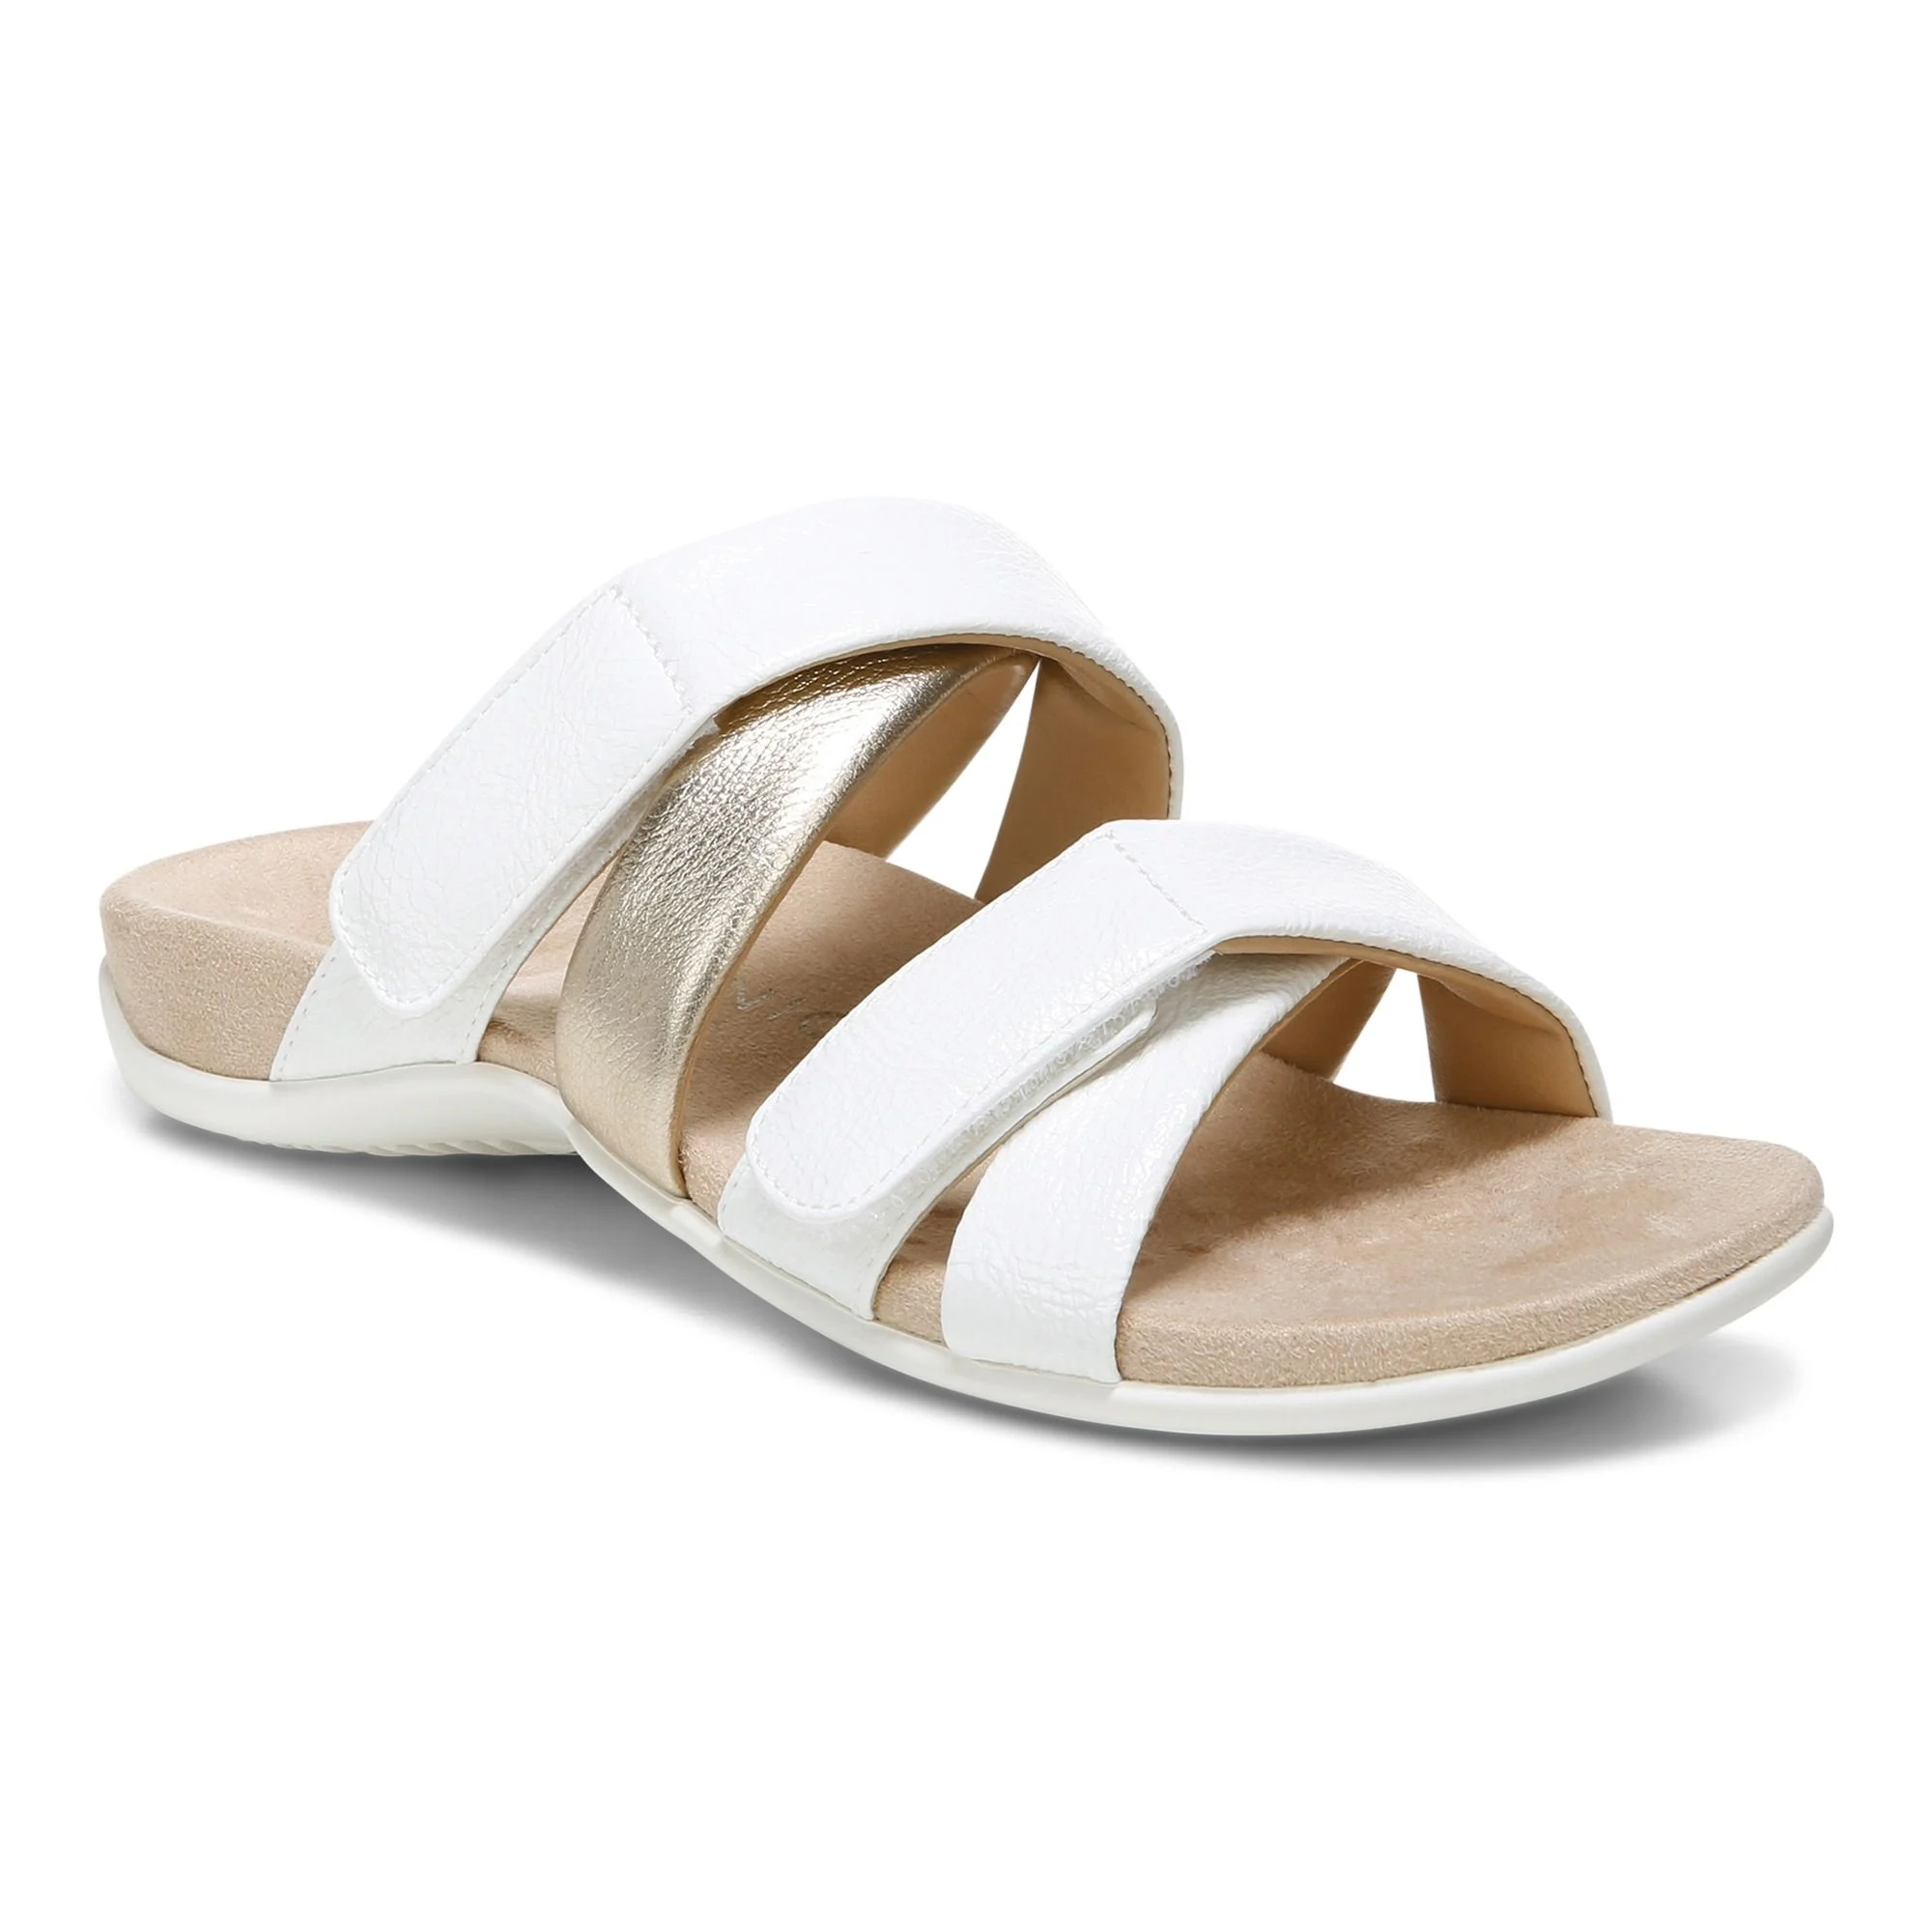 Women's Vionic Hadlie Sandal - White | Stan's Fit For Your Feet